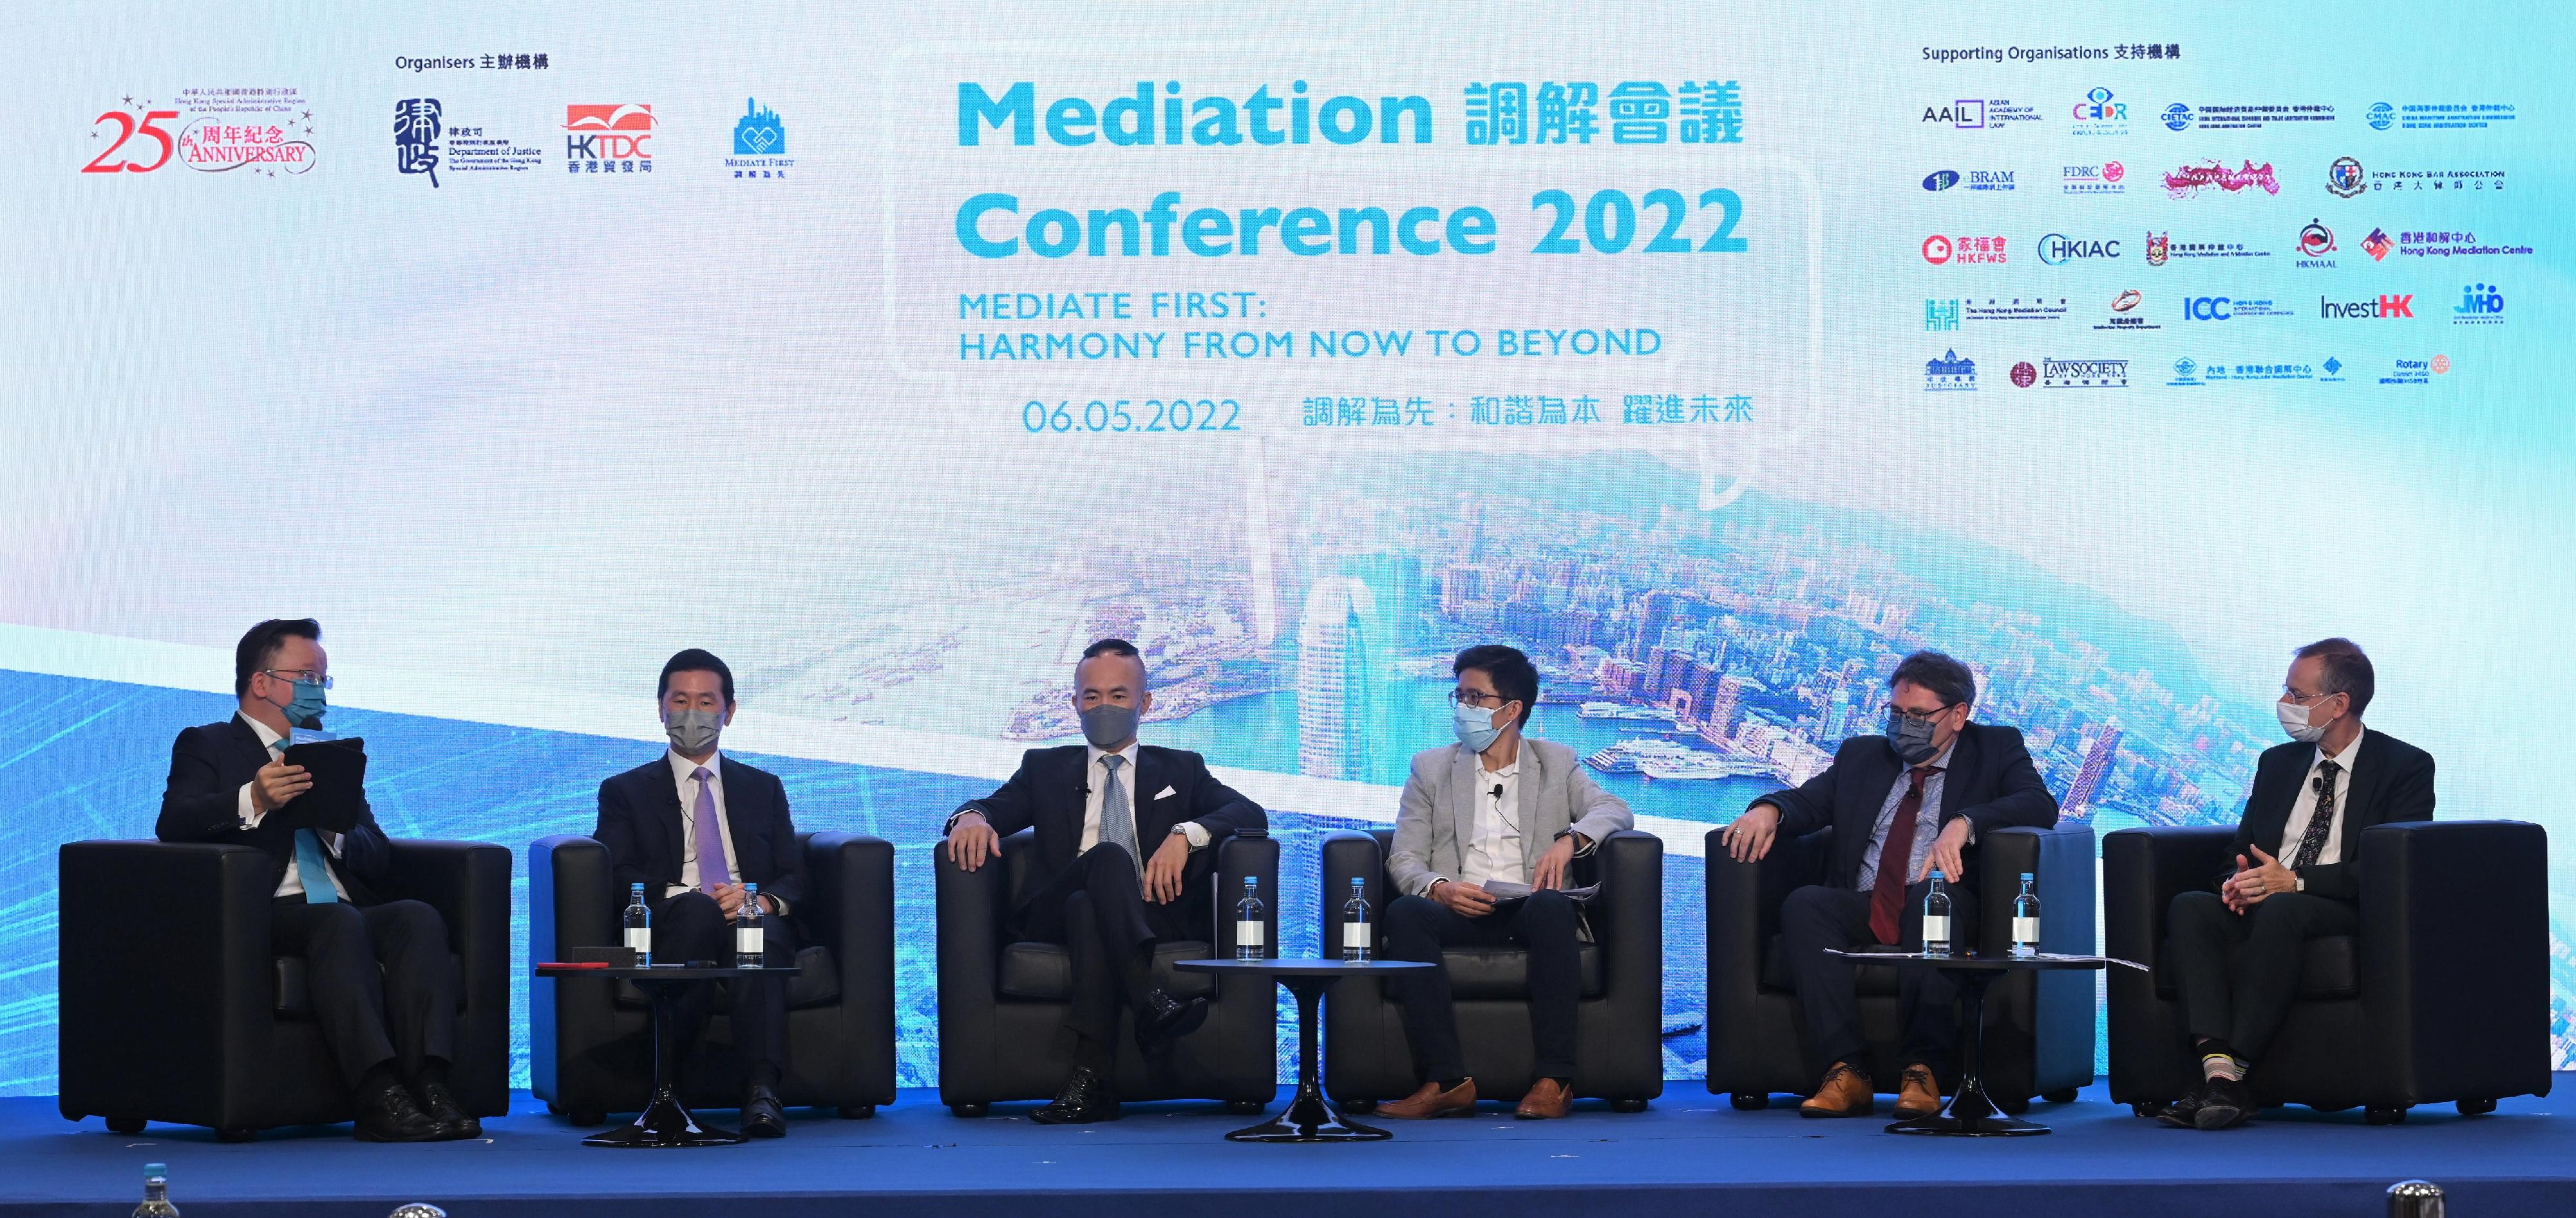 The Mediation Conference 2022 co-organised by the Department of Justice and the Hong Kong Trade Development Council was successfully held today (May 6). Photo shows Panel 3 speakers discussing the possible legal issues and pitfalls brought by the sphere of digital novelties.